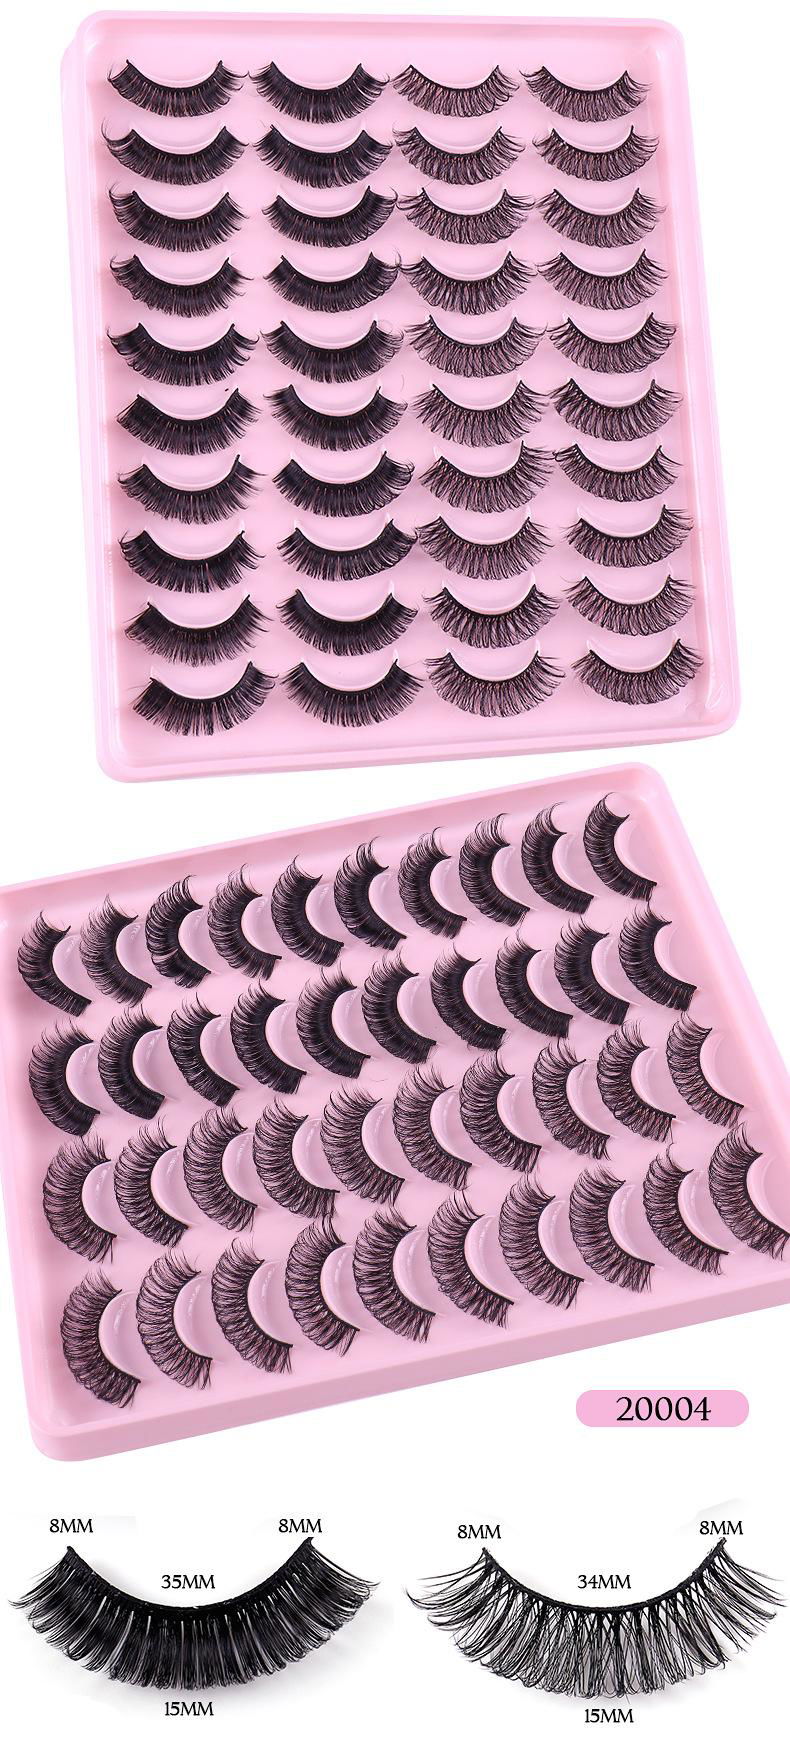 DD Russia Curl Eye Lashes False Mink Mixed Styles Eye Lashes 20 Pair Package 5